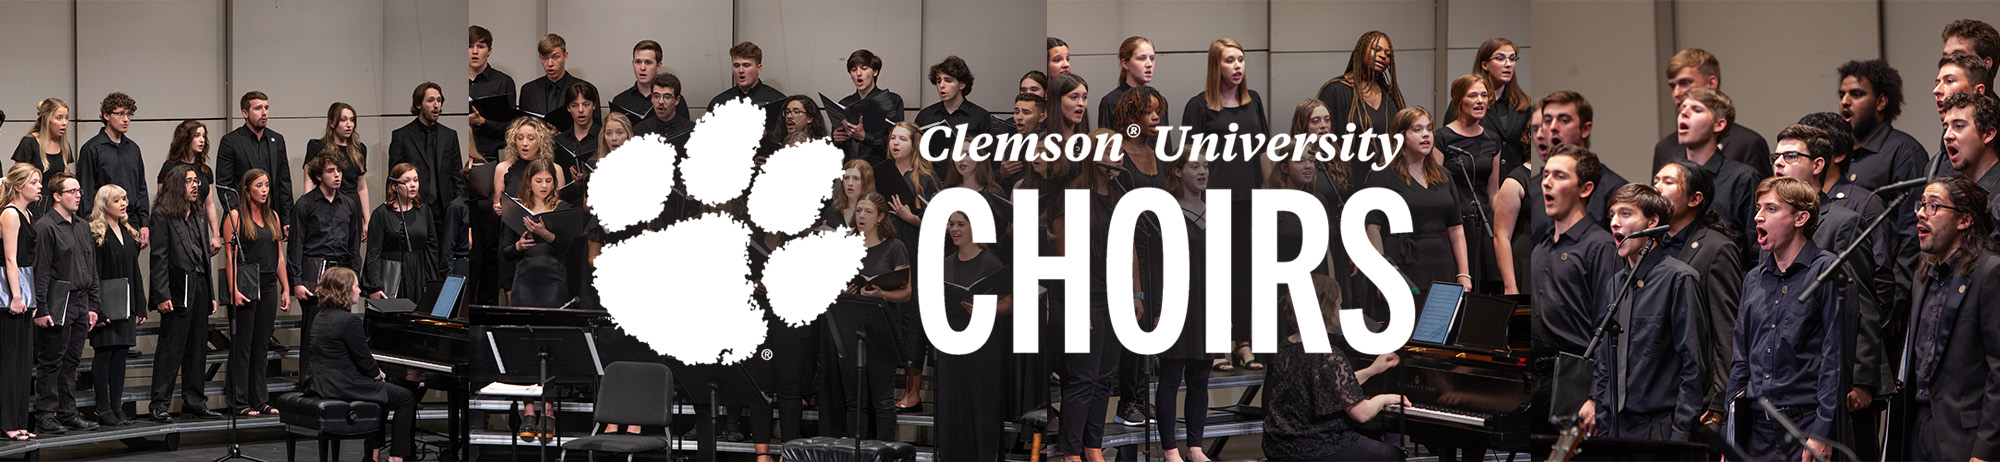 Images of Clemson Choirs rehearsing with logo